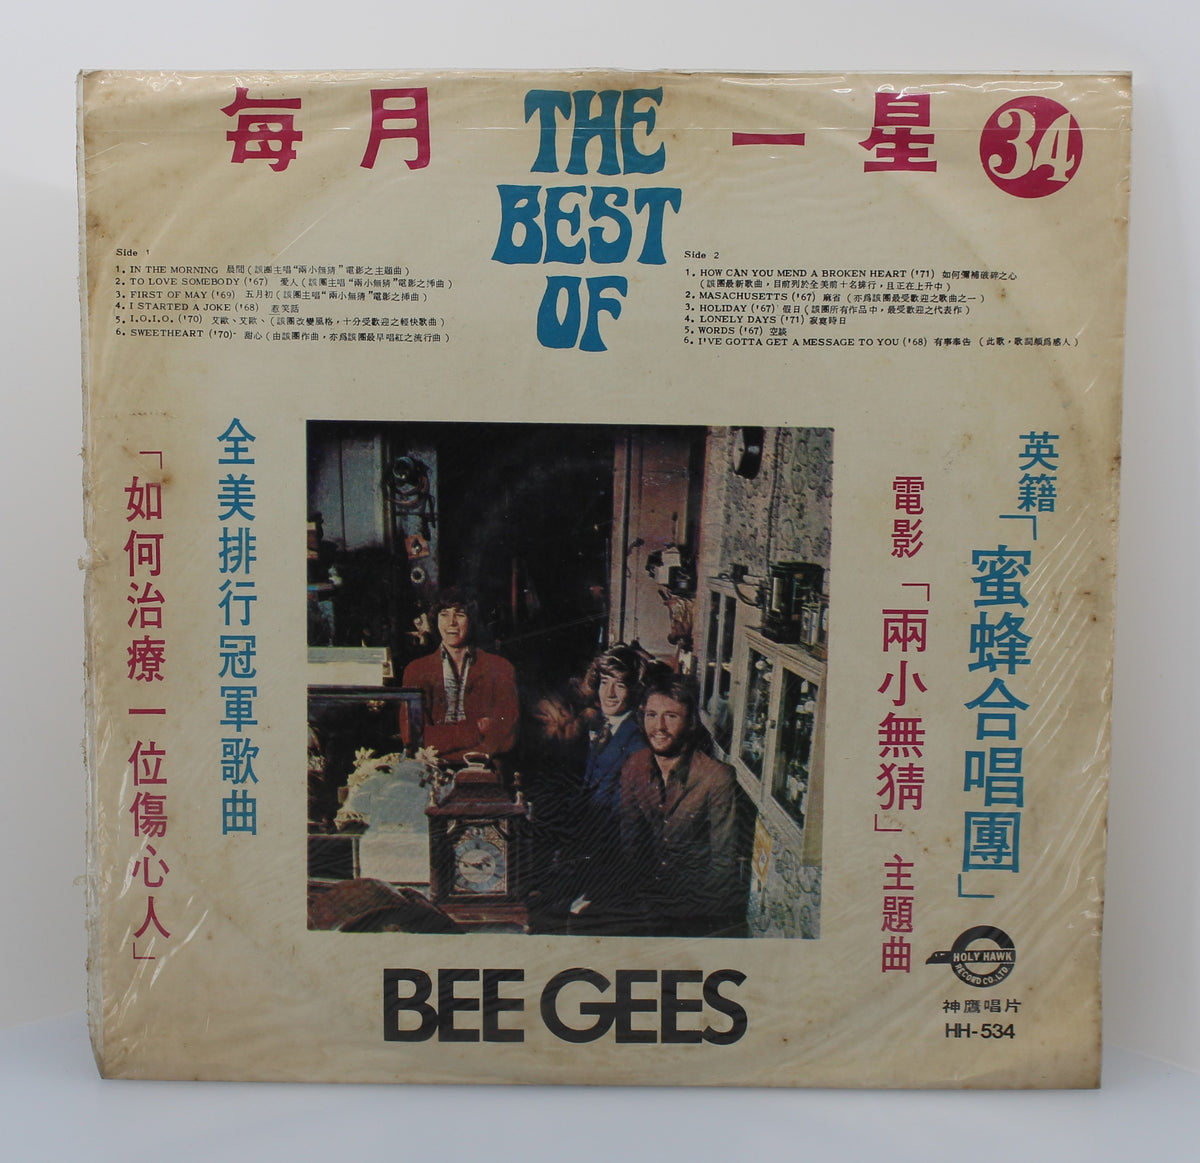 Bee Gees – The Best Of, Vinyl, LP, Compilation, Unofficial Release, Taiwan